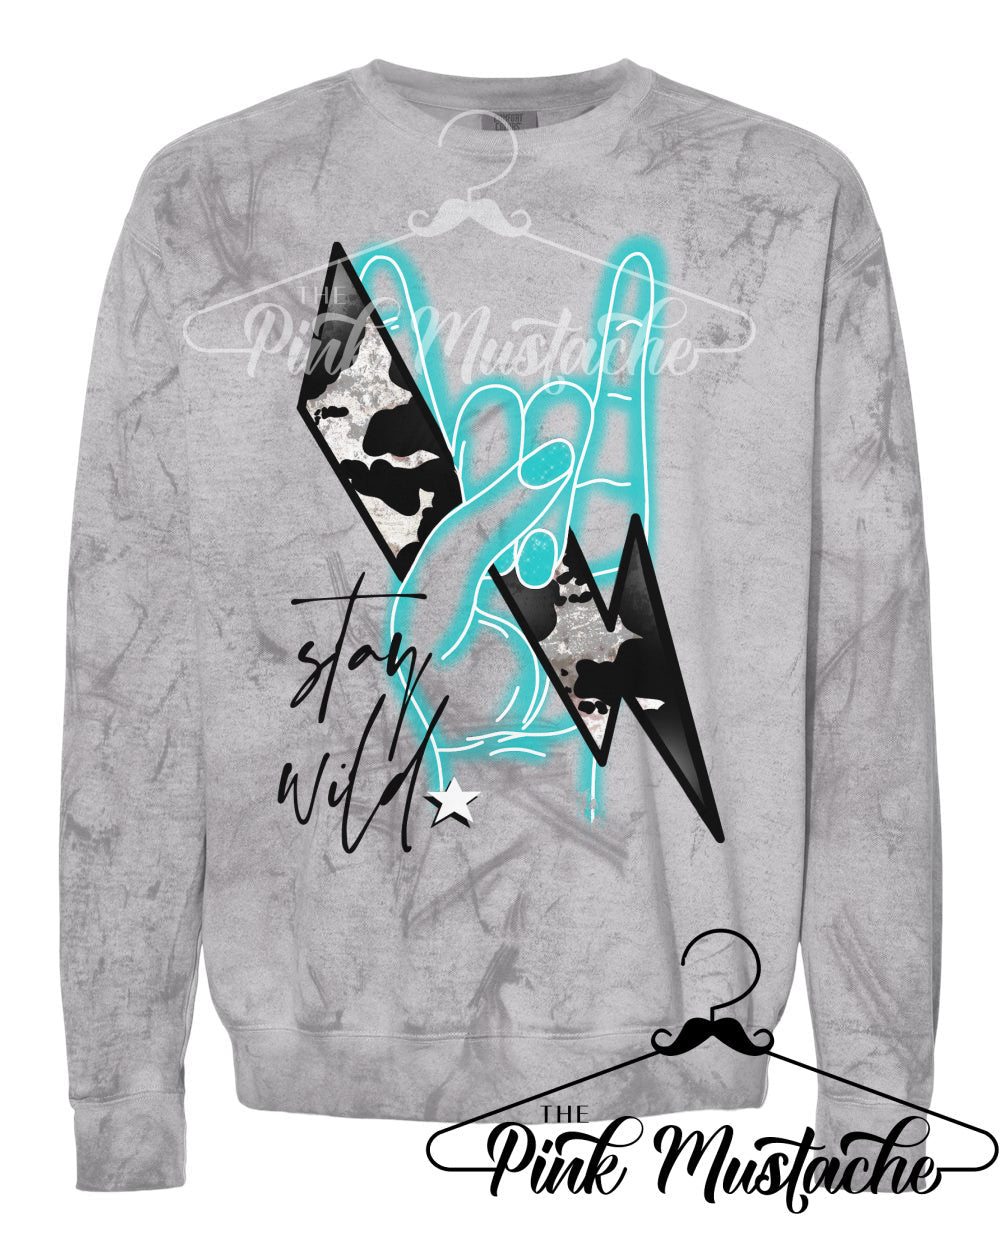 Comfort Colors Colorblast Stay Wild Rocker Sweatshirt - Sizes and Inventory Limited